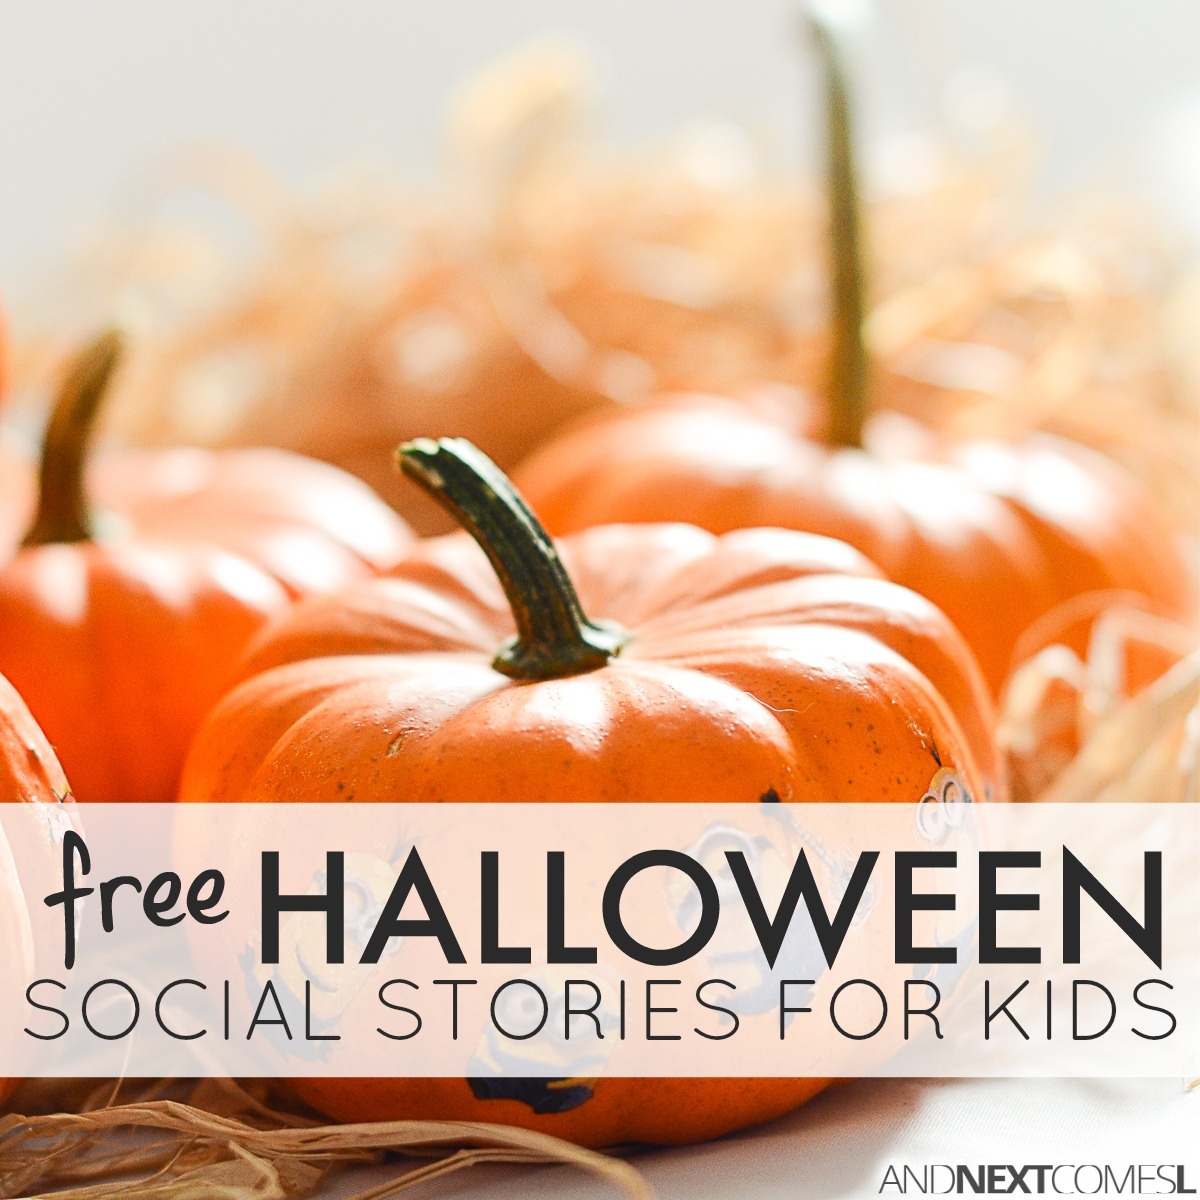 Halloween Social Stories For Kids With Autism | And Next Comes L - Free Printable Social Stories For Kids